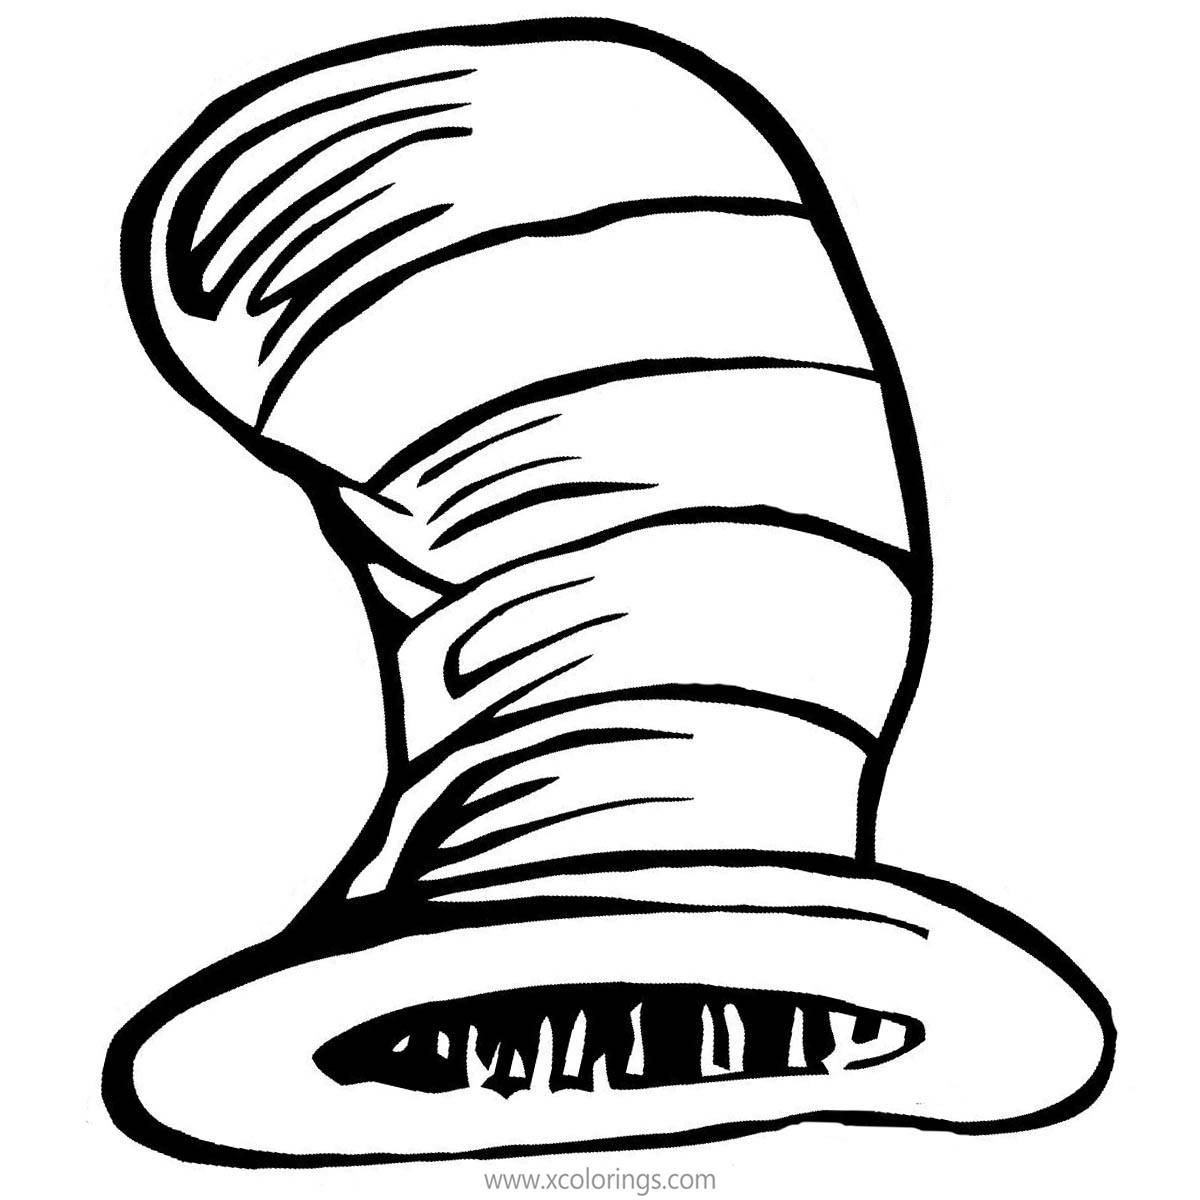 Cat In The Hat Coloring Pages For Preschool Coloring Pages